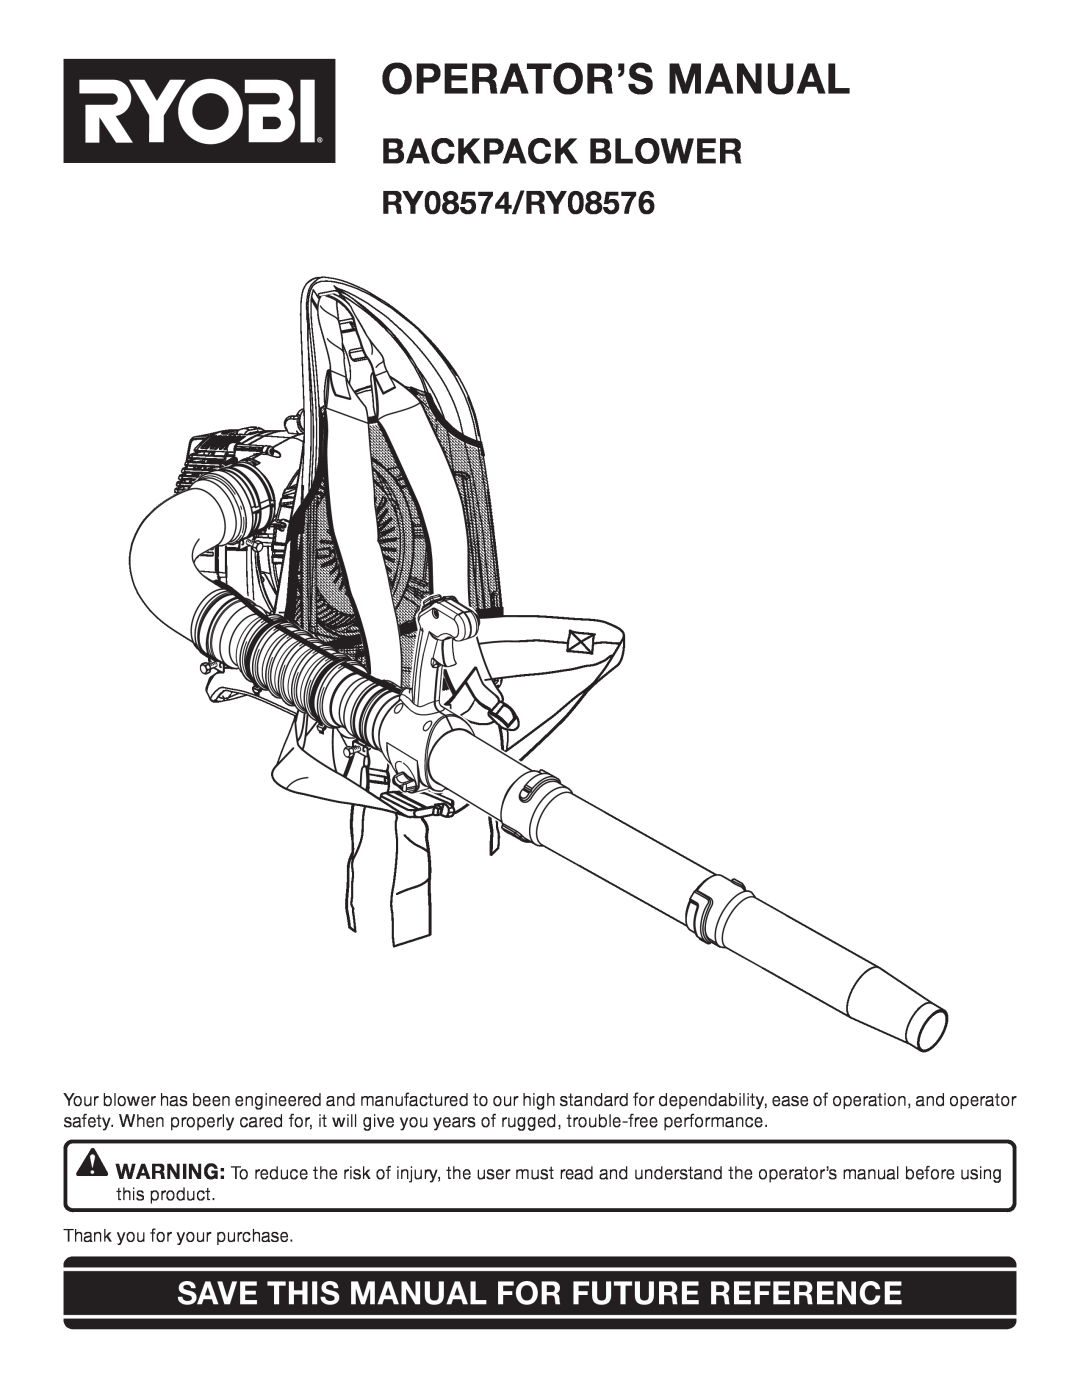 Ryobi manual Operator’S Manual, Backpack Blower, RY08574/RY08576, Save This Manual For Future Reference 